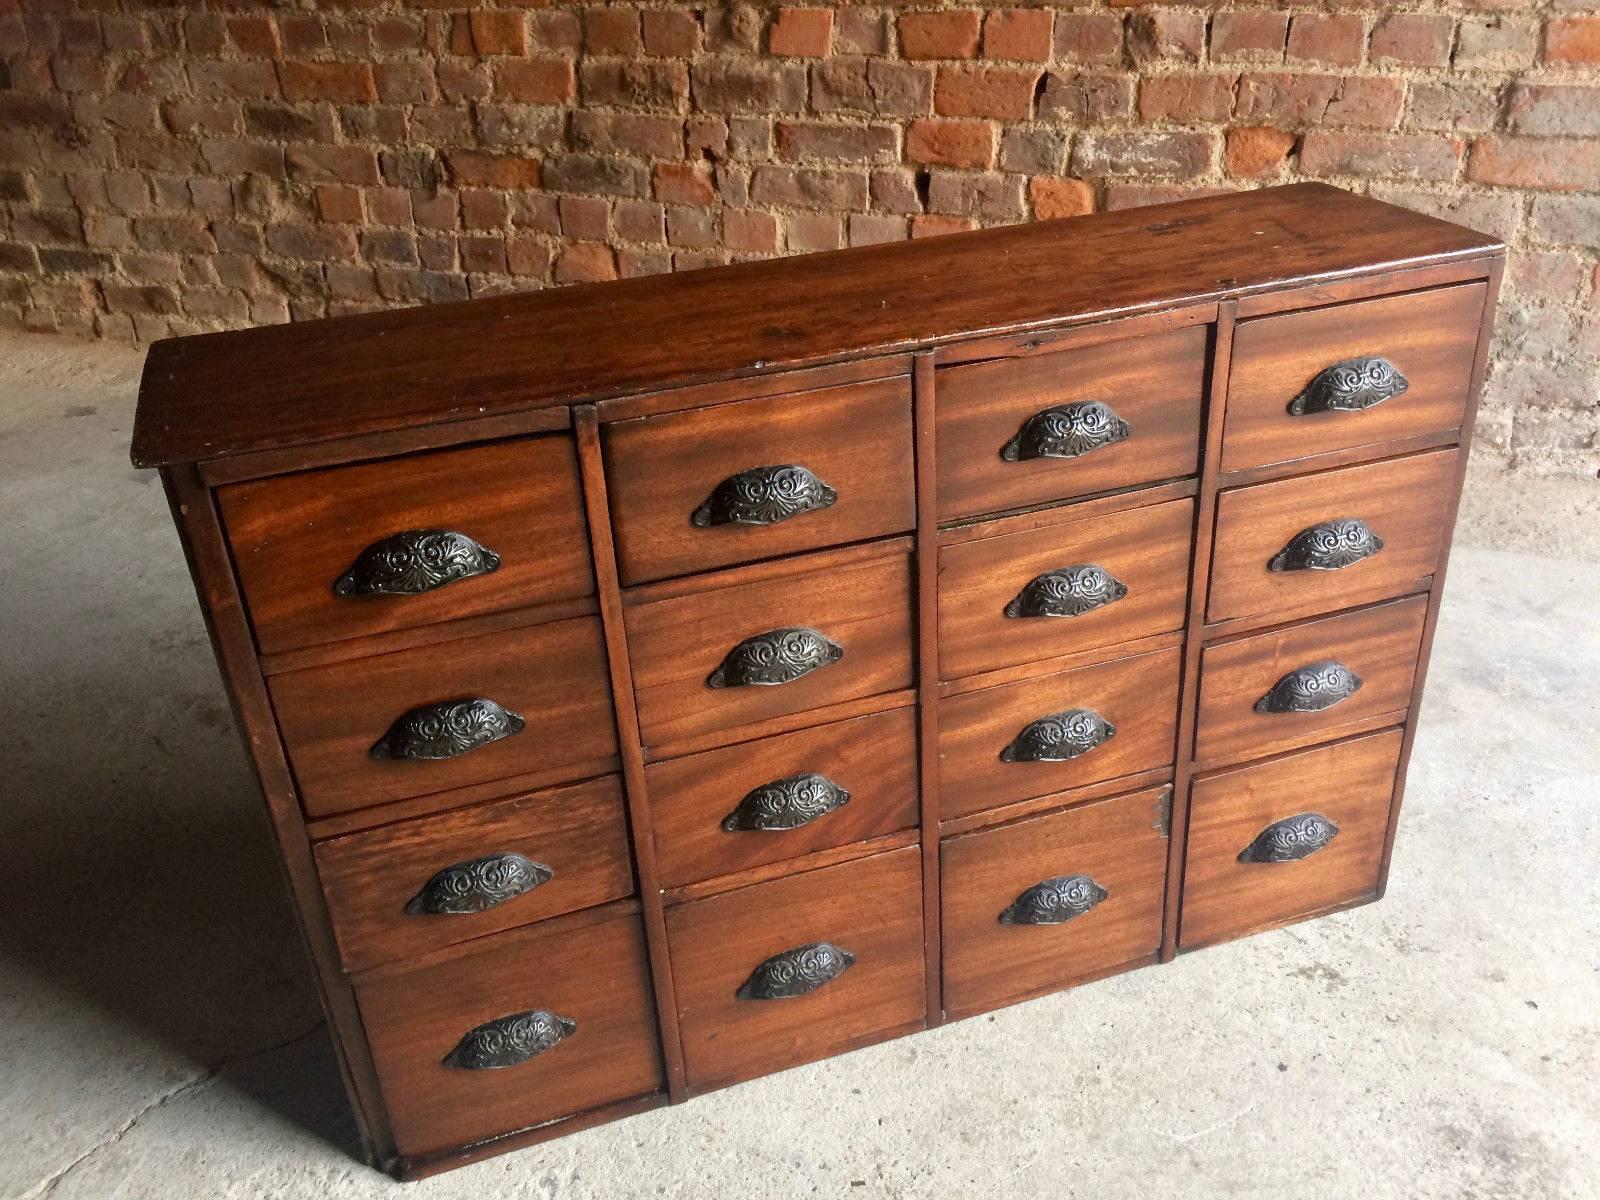 Antique Mahogany Haberdashery Chest of Drawers Dresser Industrial Loft 16-Drawer In Excellent Condition In Longdon, Tewkesbury